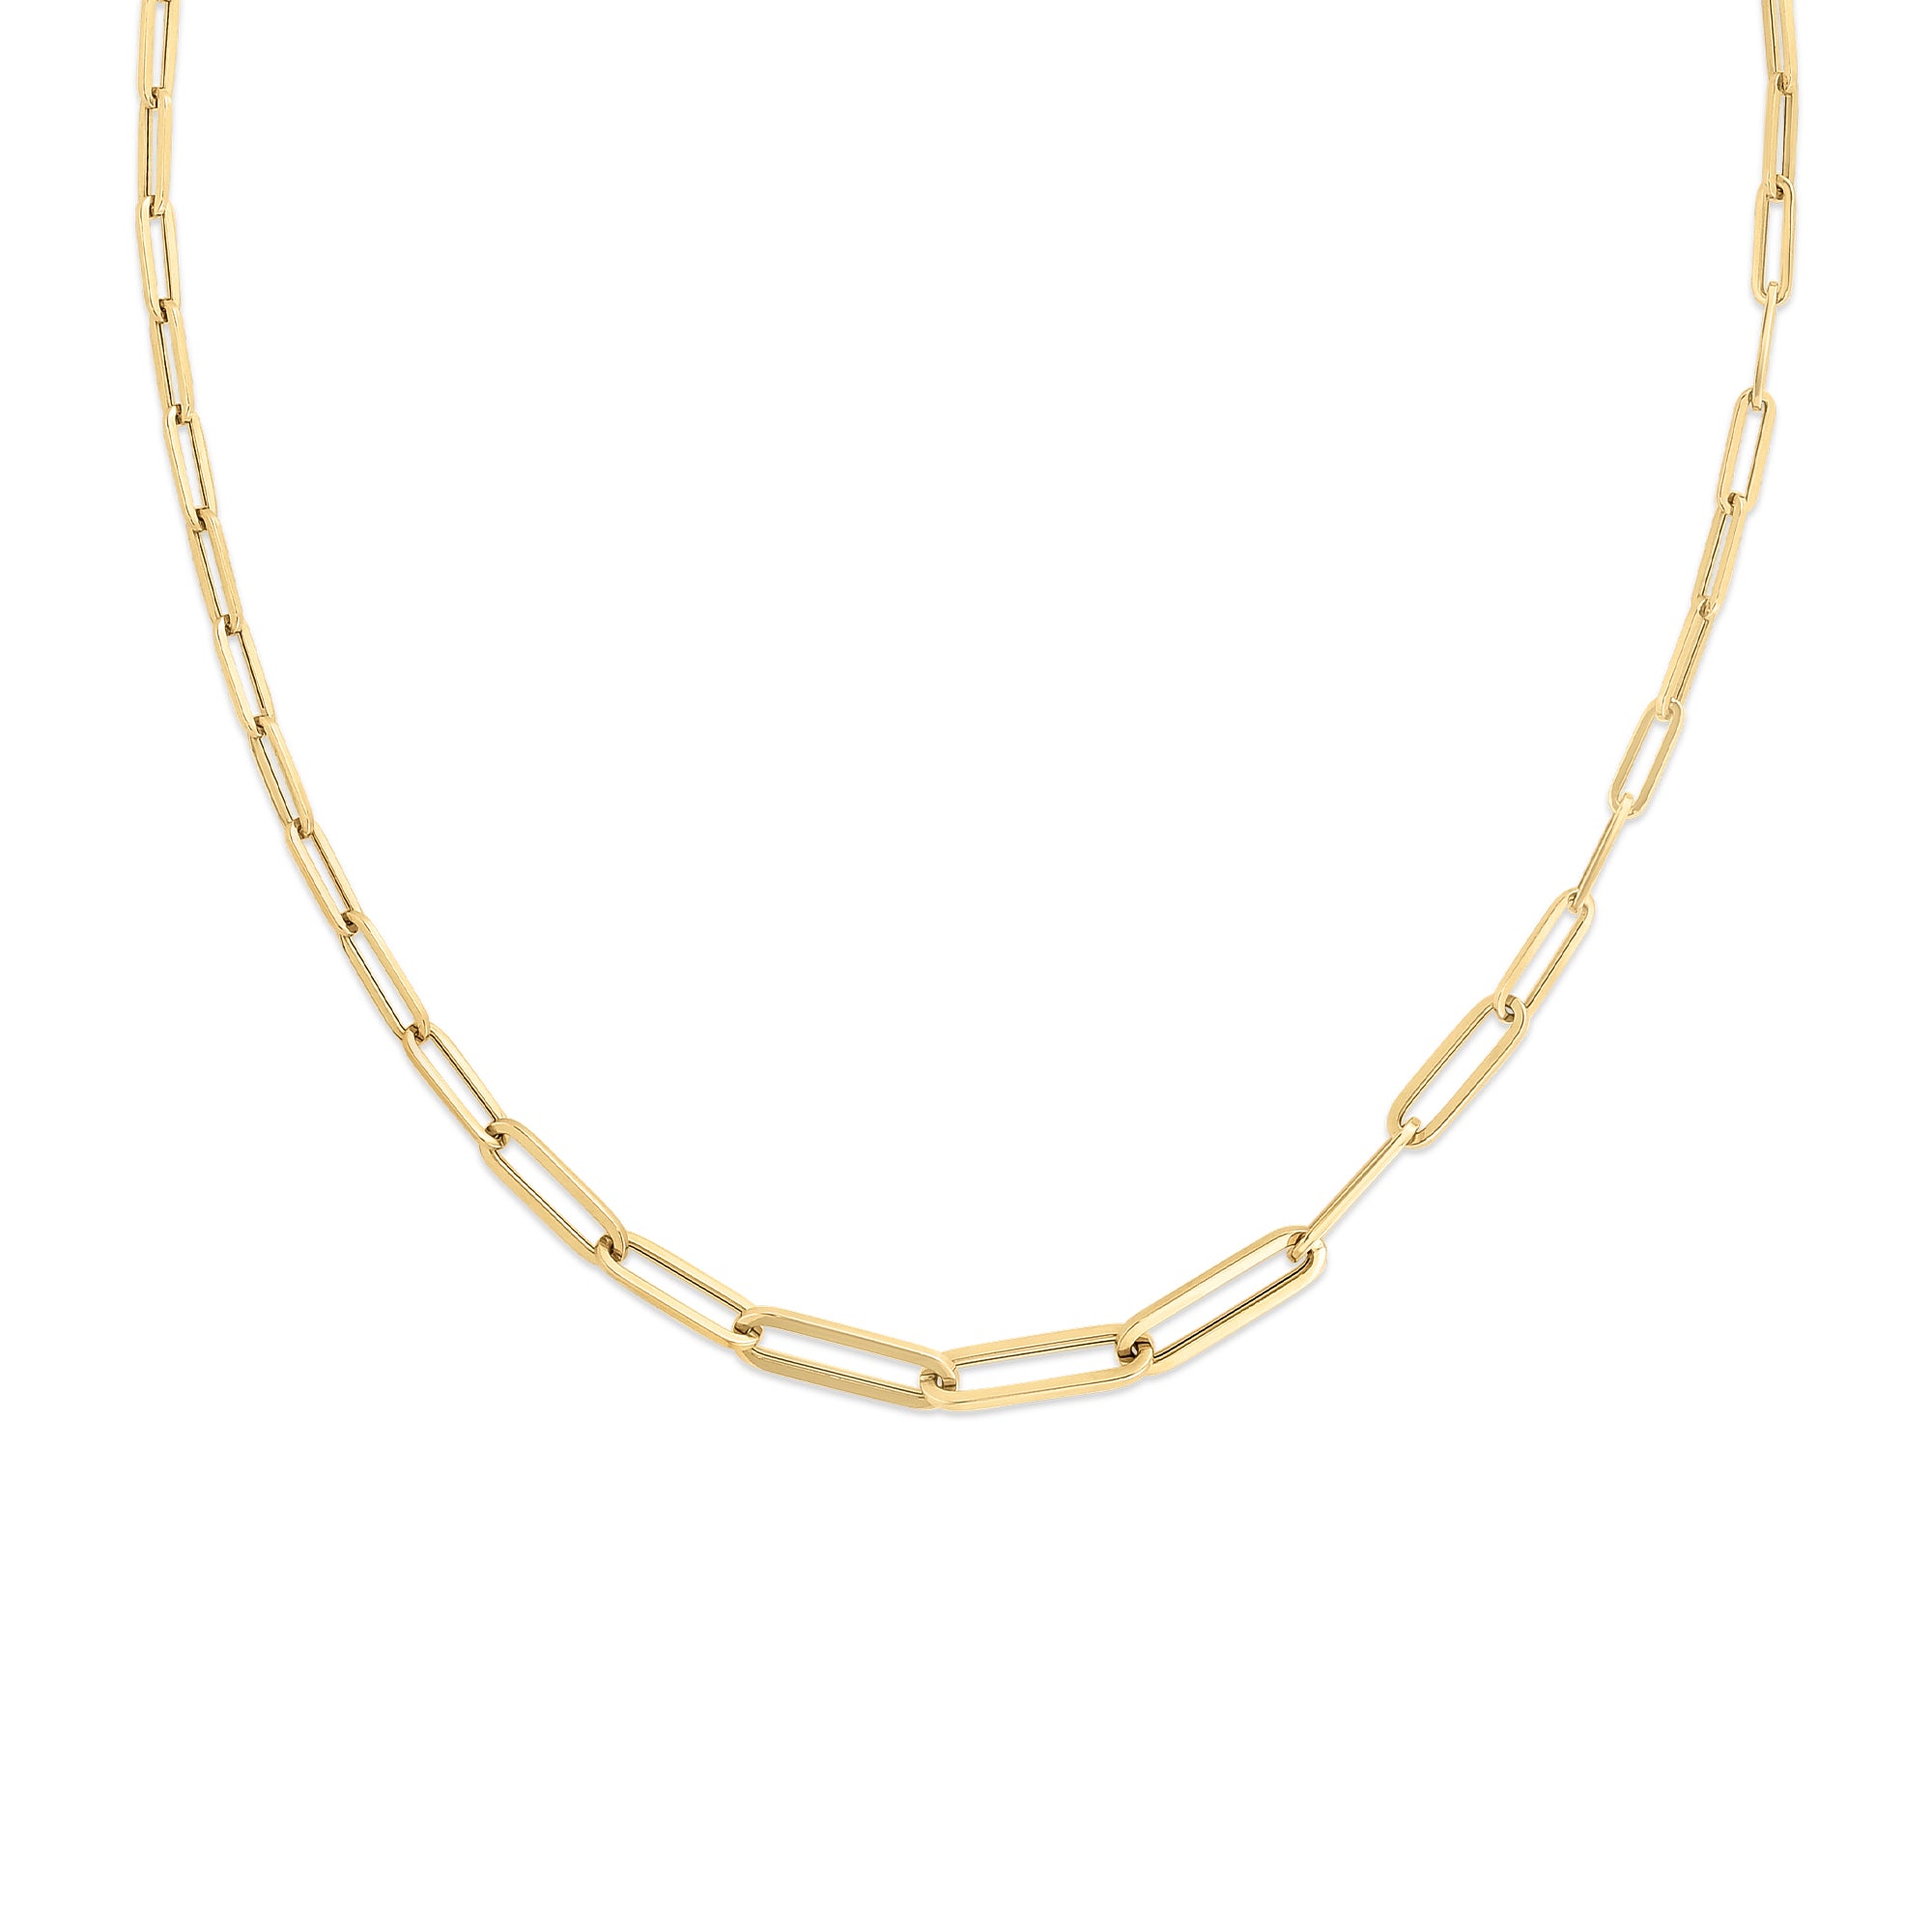 18K YELLOW GOLD PAPERCLIP LINK NECKLACE